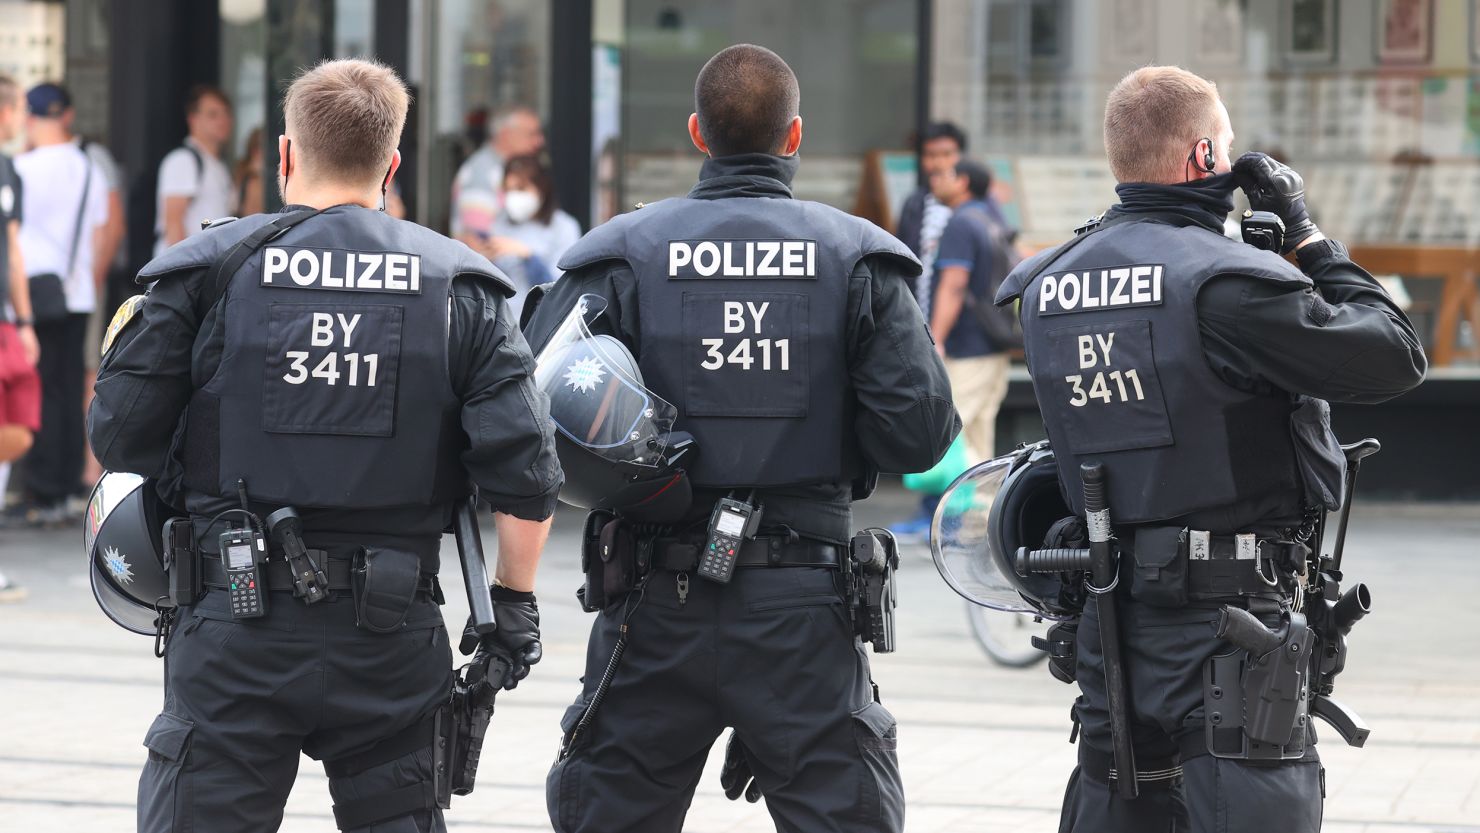 Police officers in Wurzburg on Friday.